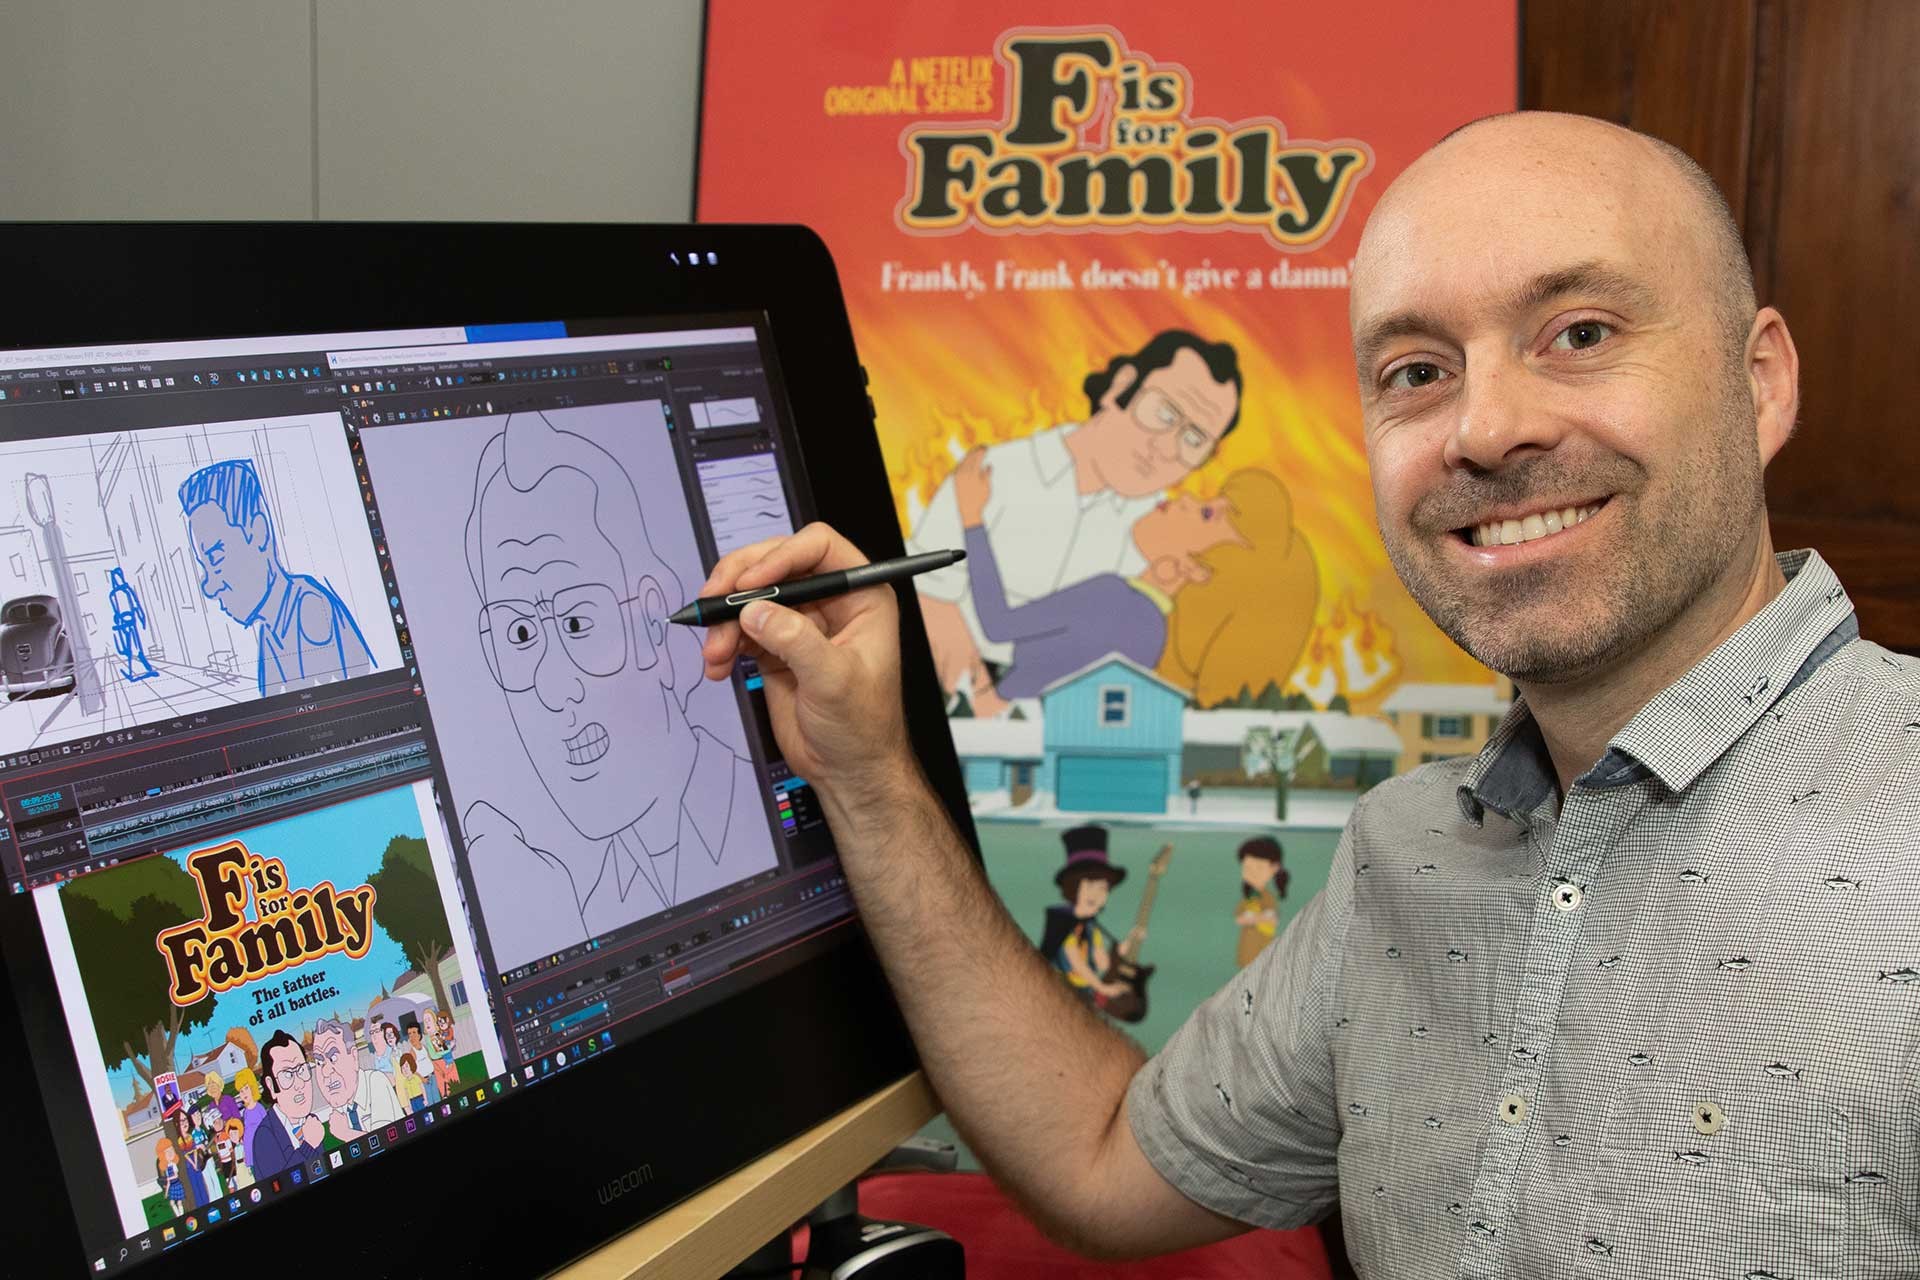 A smiling man poses in front of computer with animated sketches